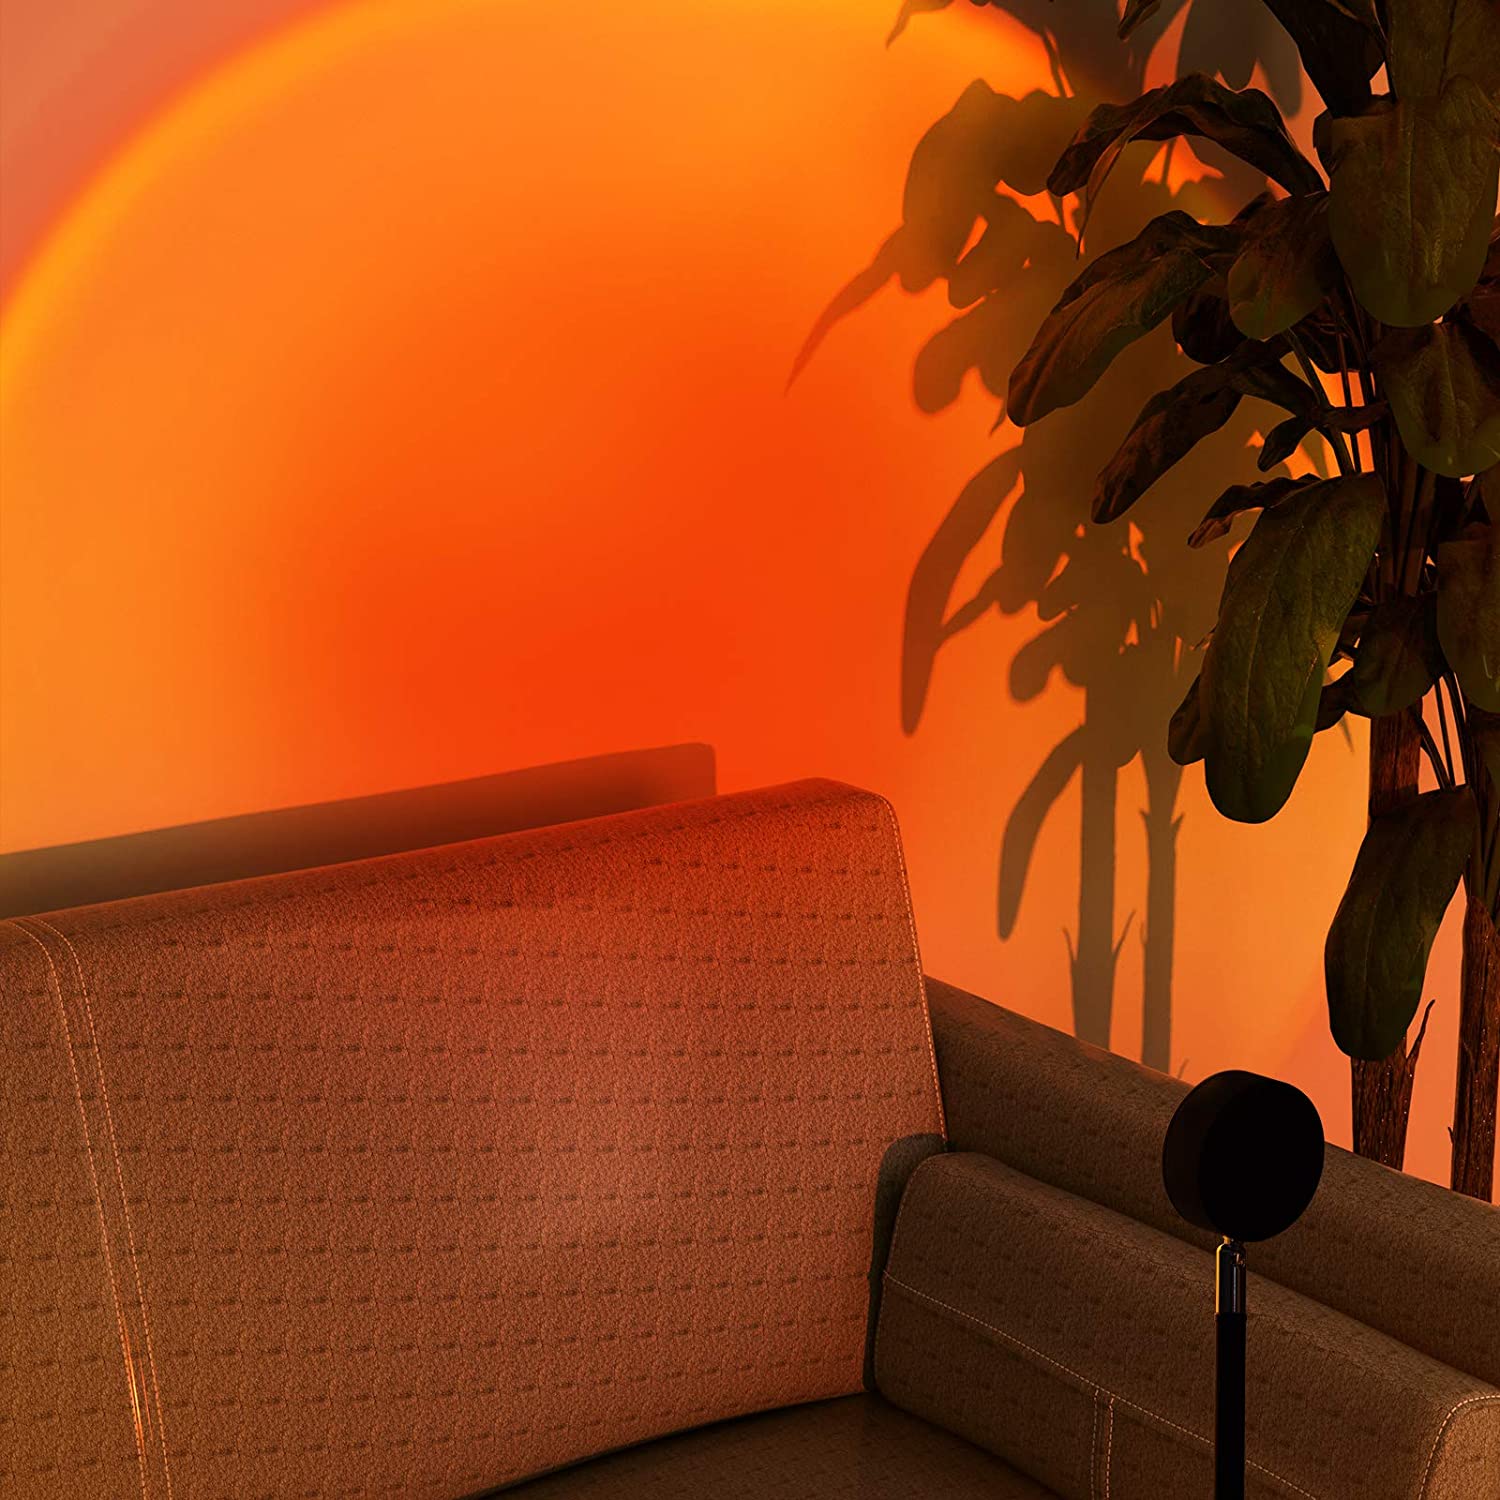 Shop The Sunset Lamps That Went Viral On TikTok | HelloGiggles